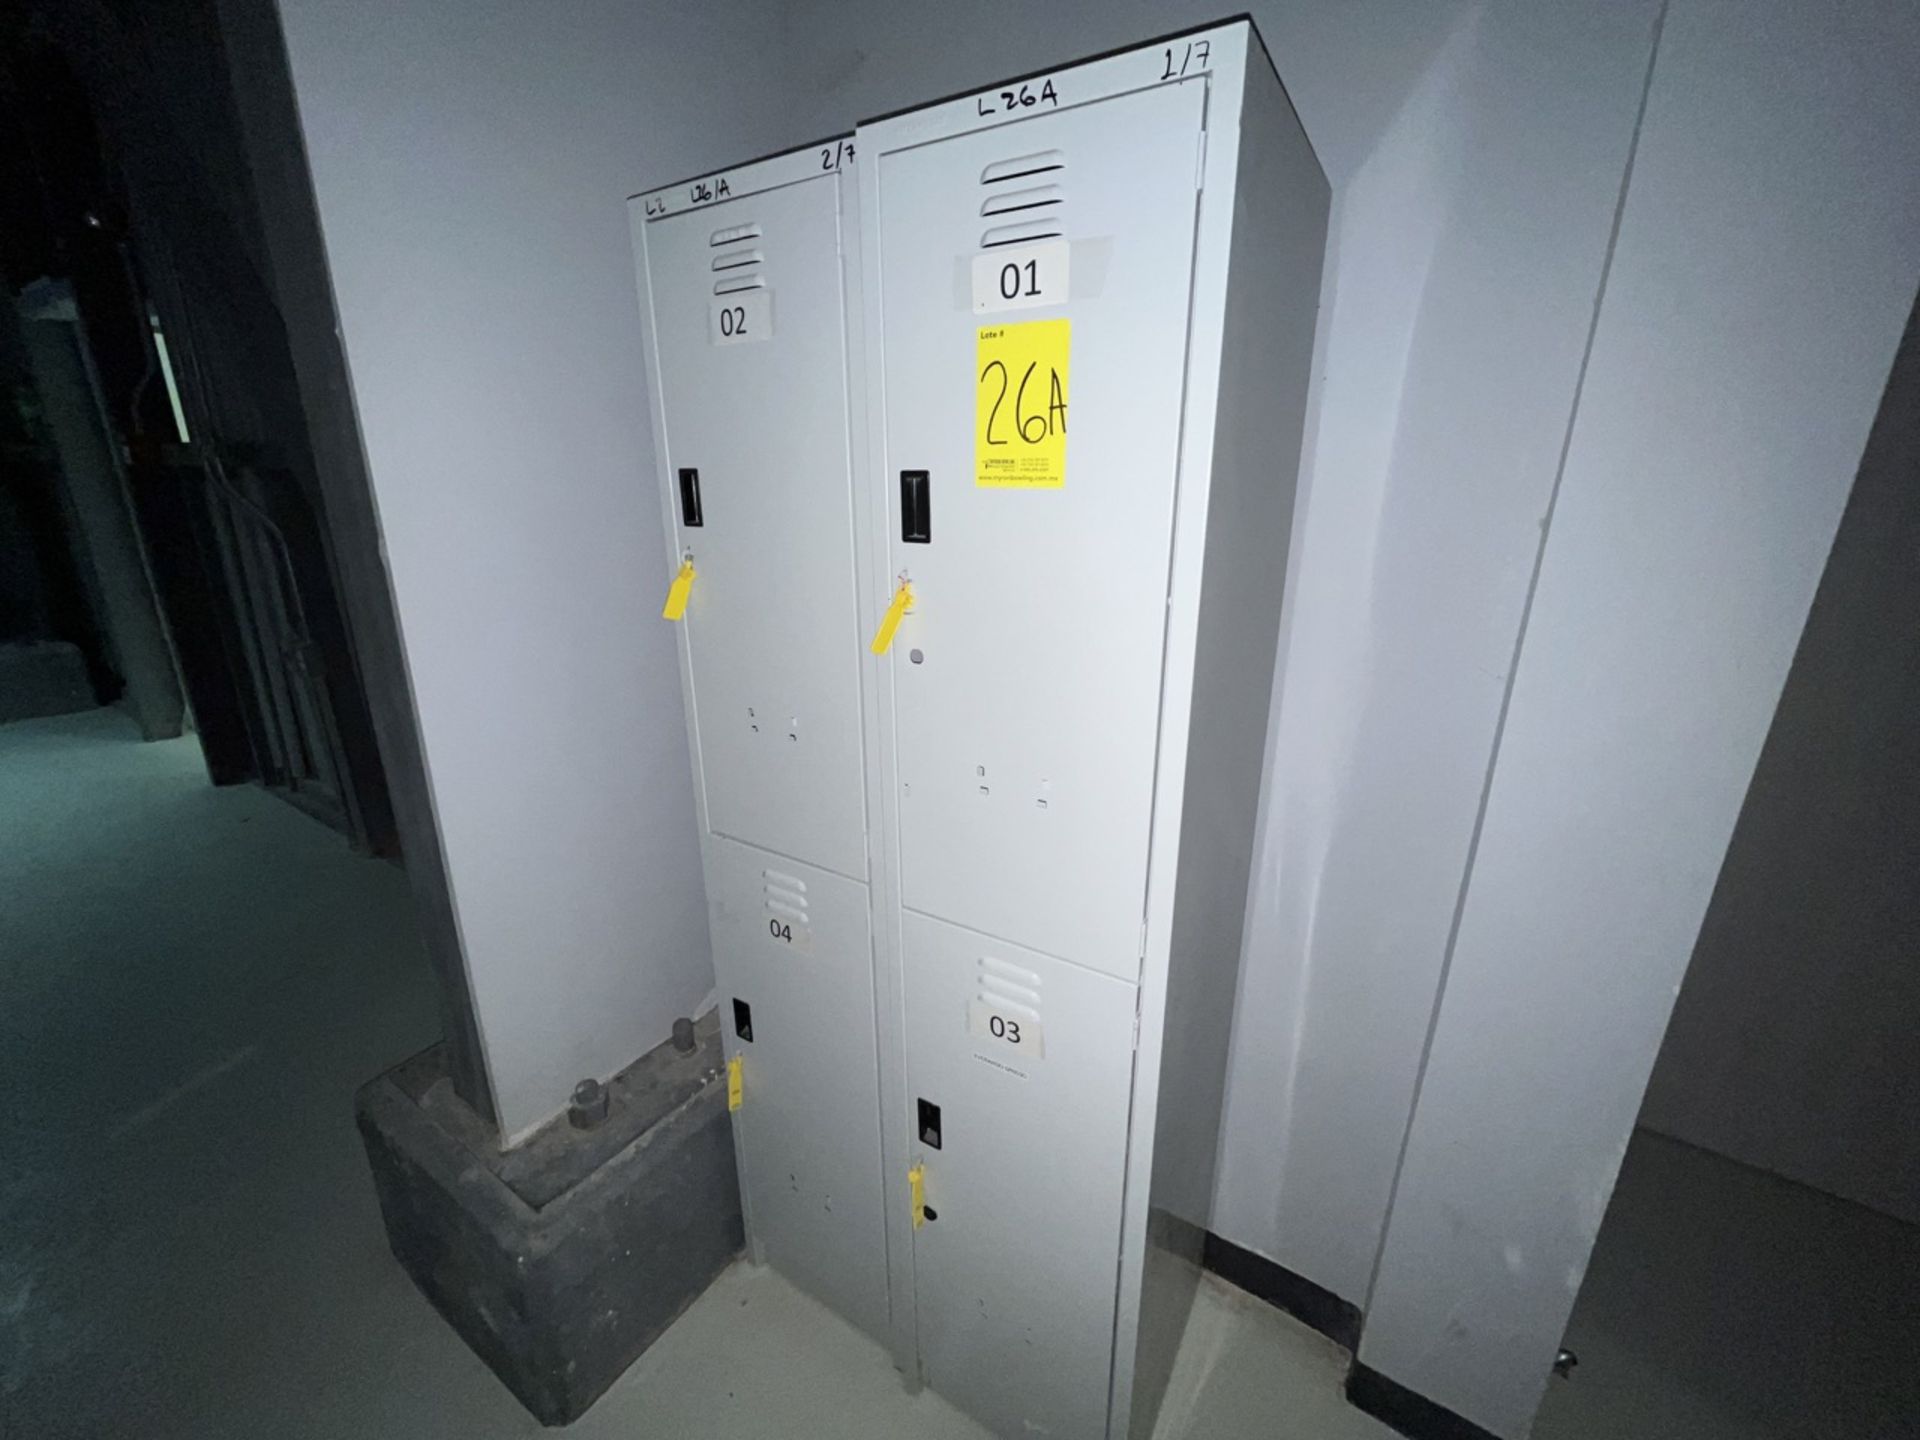 Lot of 7 storage lockers of 2 spaces each, measuring approximately 0.40 x 0.40 x 1.80 meters. / Lo - Image 7 of 8